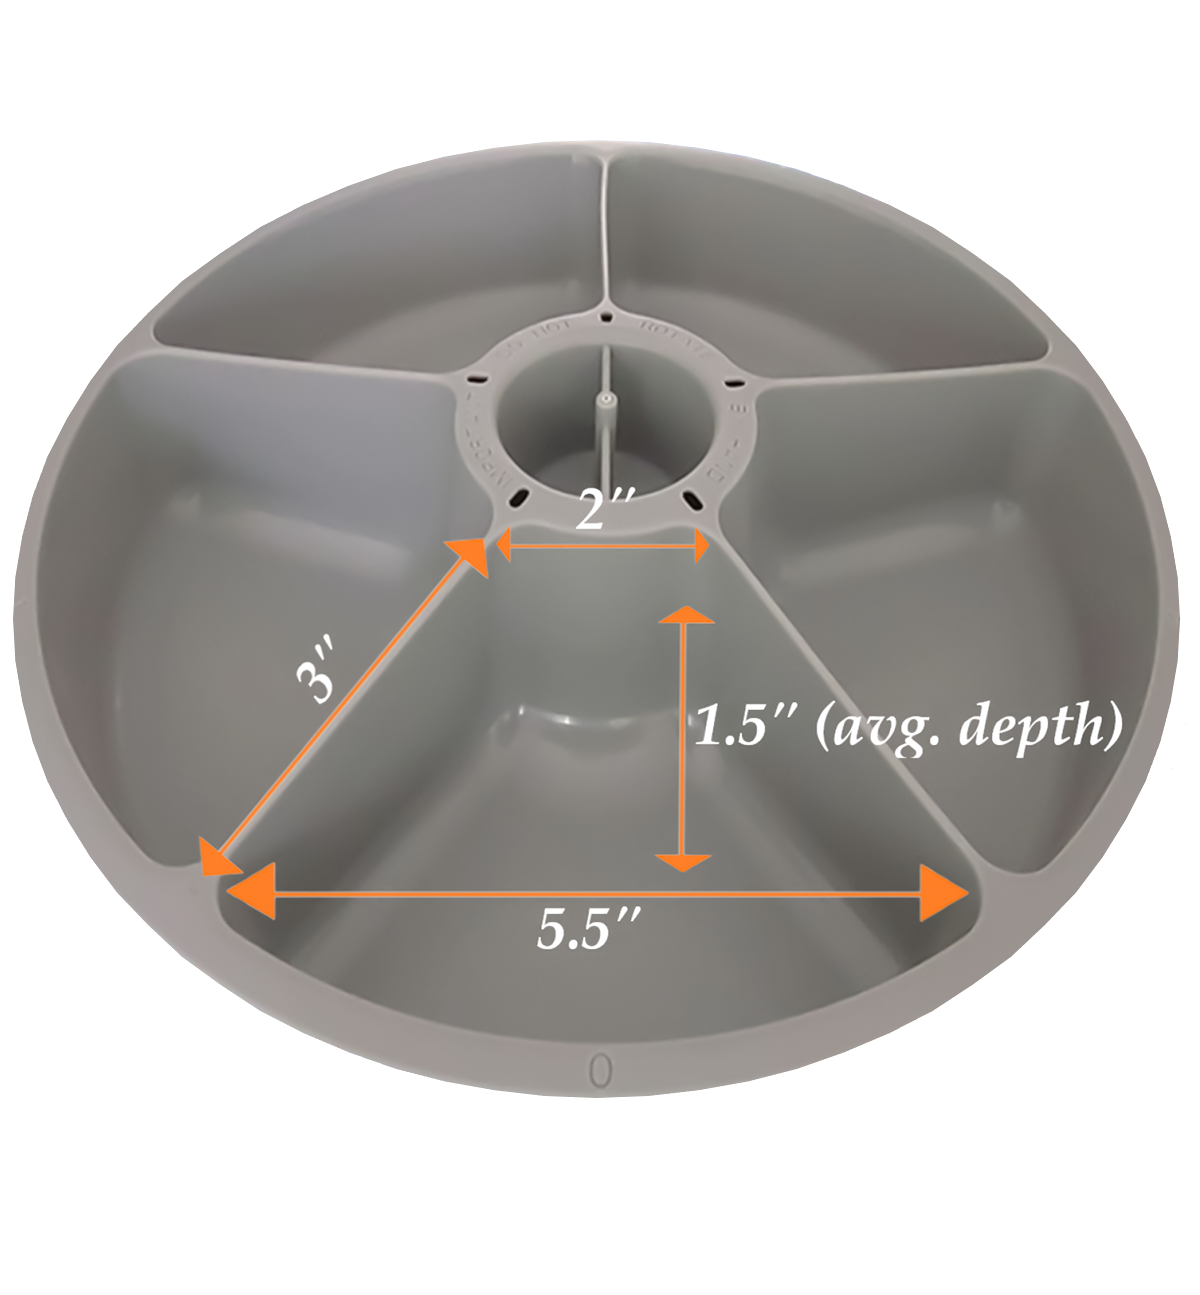 Replacement Bowl: Five-meal Automatic Pet Feeder (947)